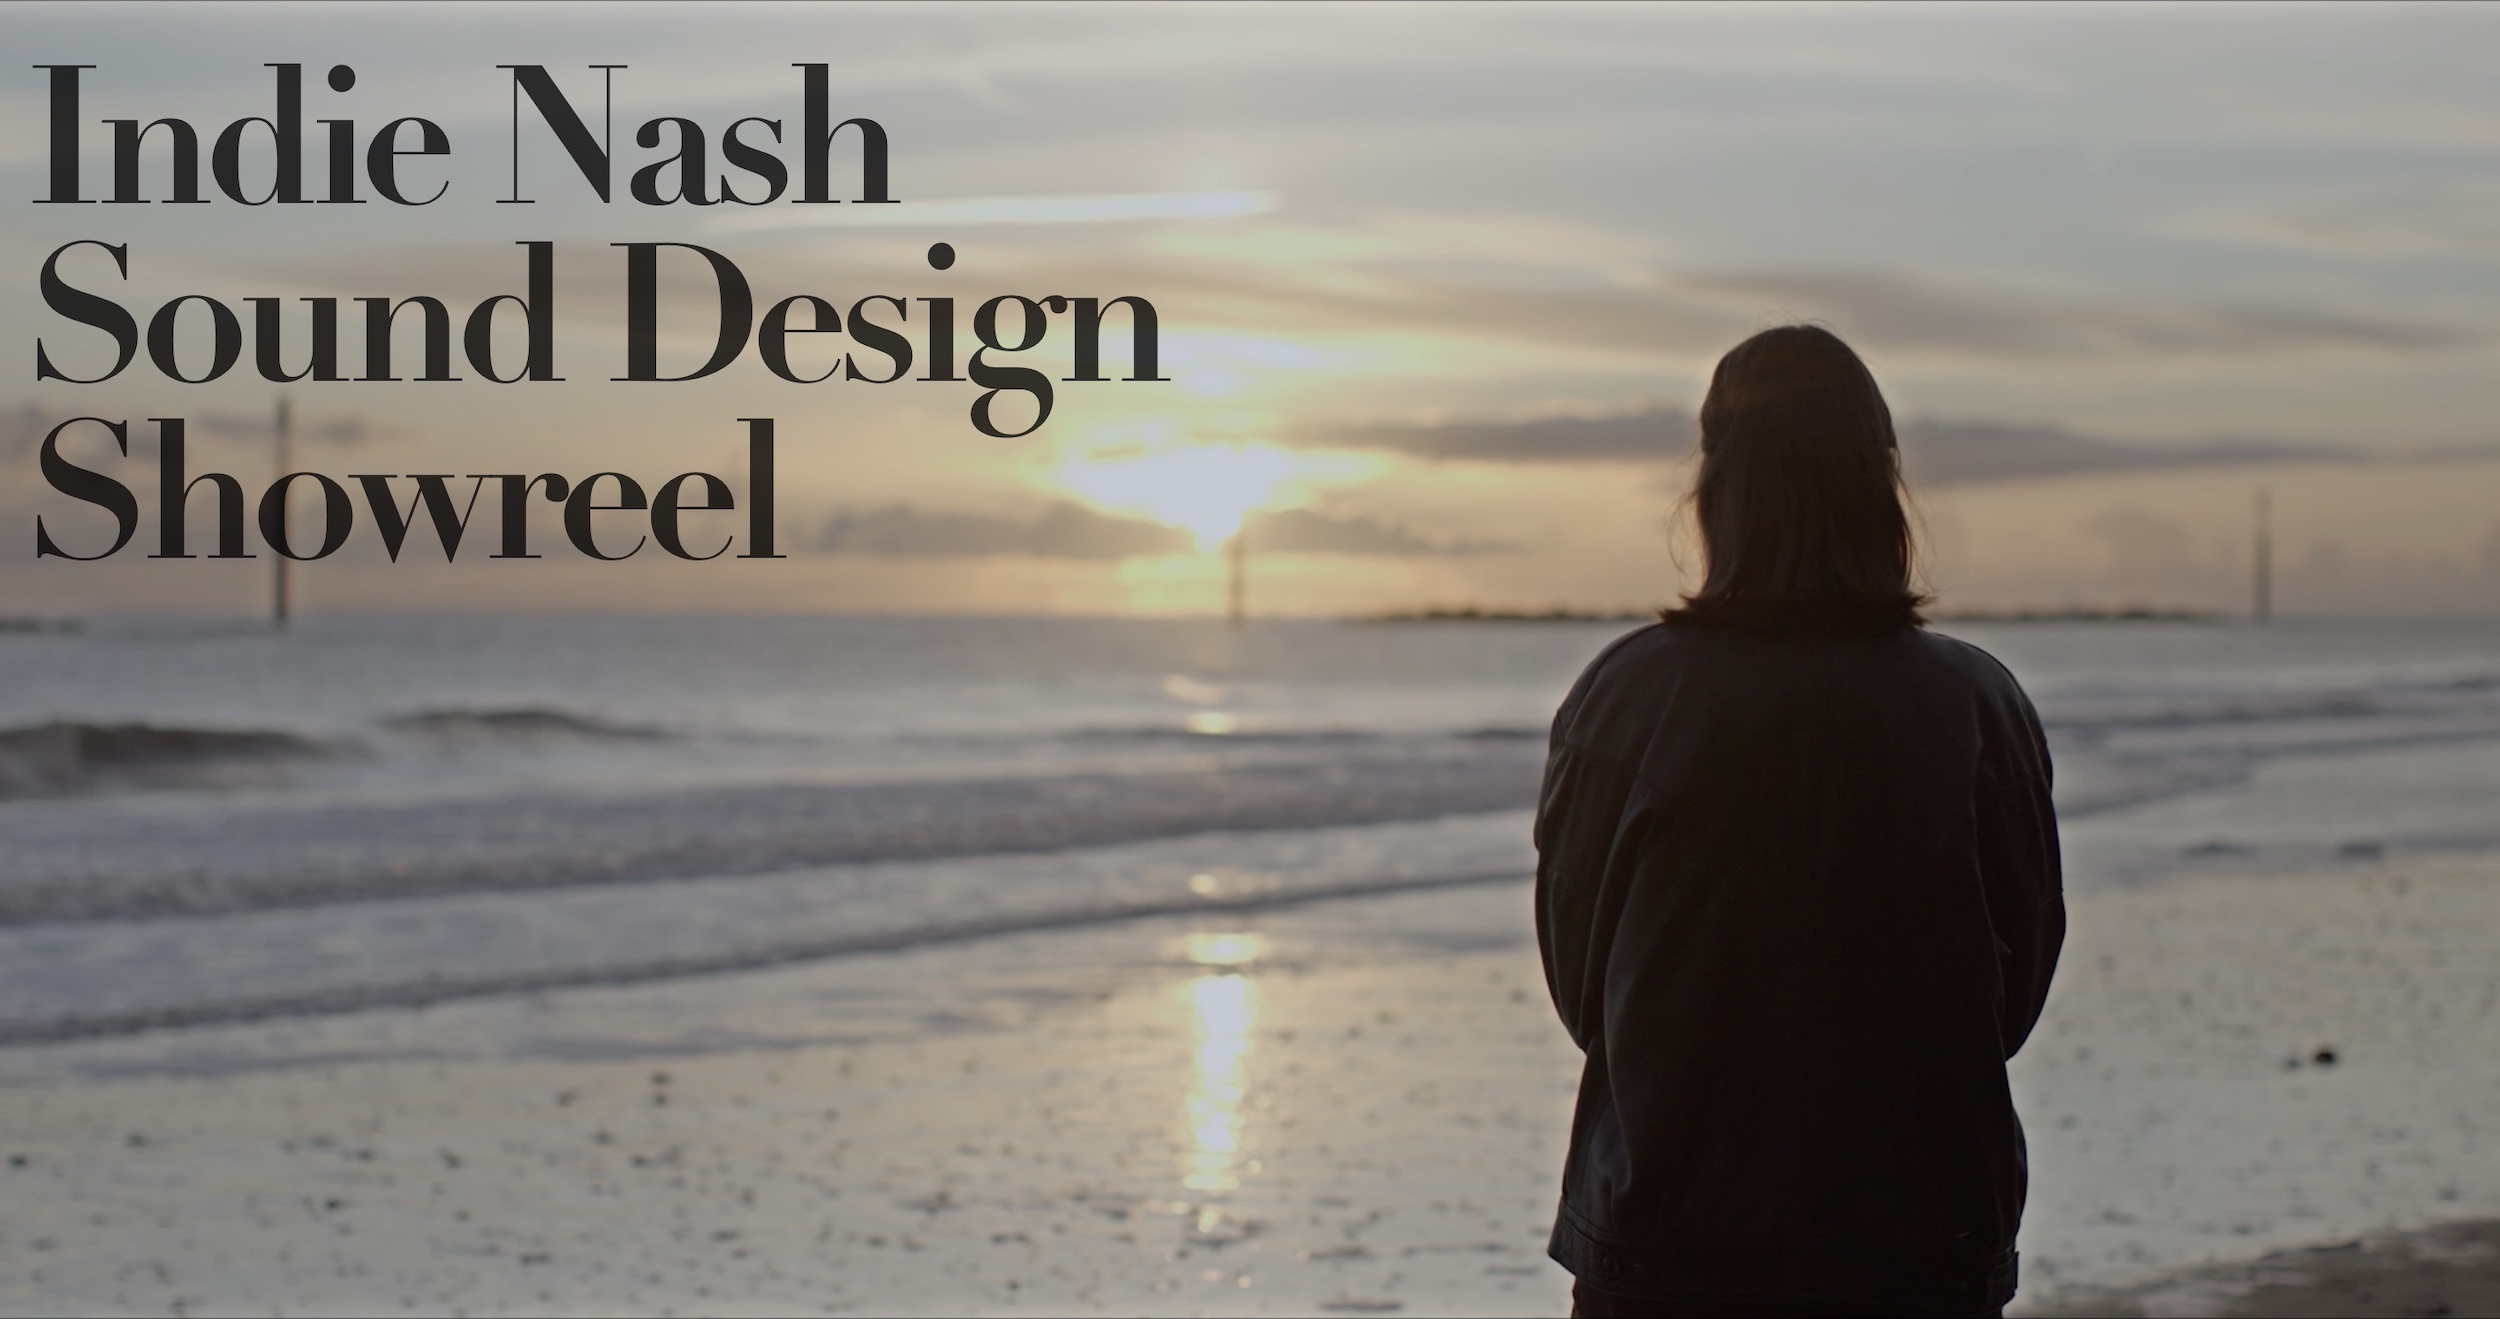 Still from film featuring silhouetted figure on a beach with the words Indie Nash Sound Design Showreel